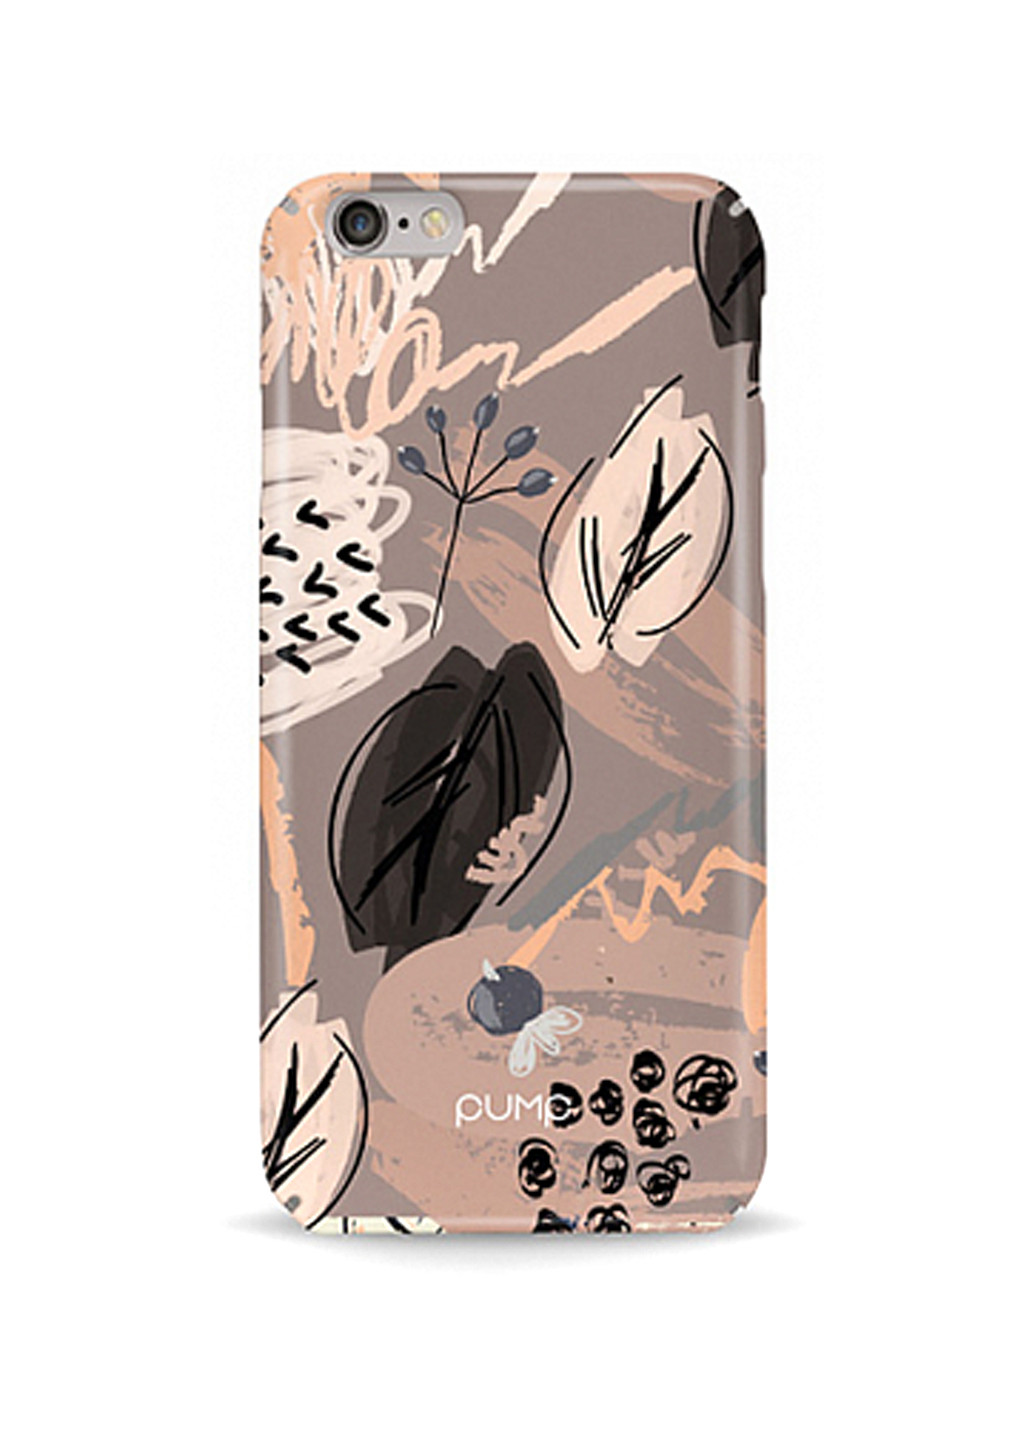 Чехол Tender Touch Case for iPhone 6/6S Leaf Fall Pump tender touch case для iphone 6/6s leaf fall (136993841)